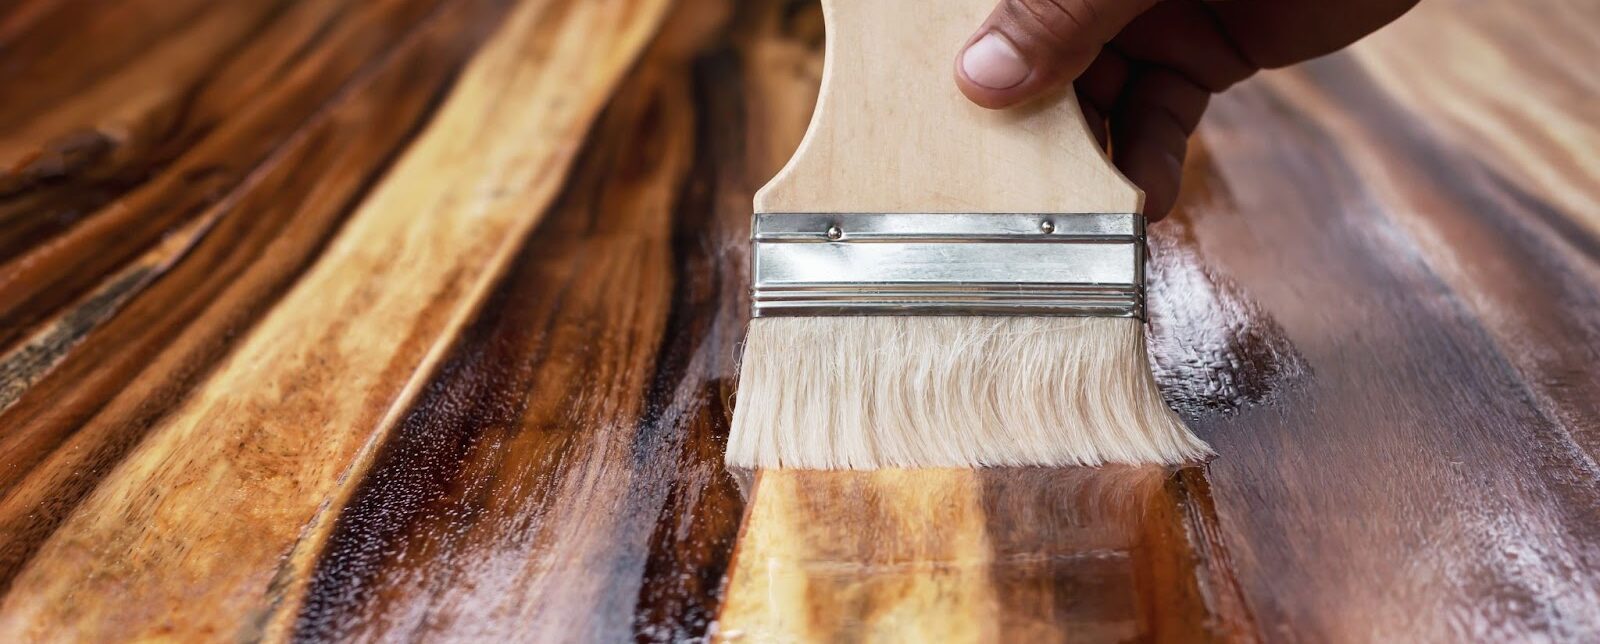 A brush applying wood stain to a beautiful hardwood floor demonstrating a step of how to stain hardwood floors.